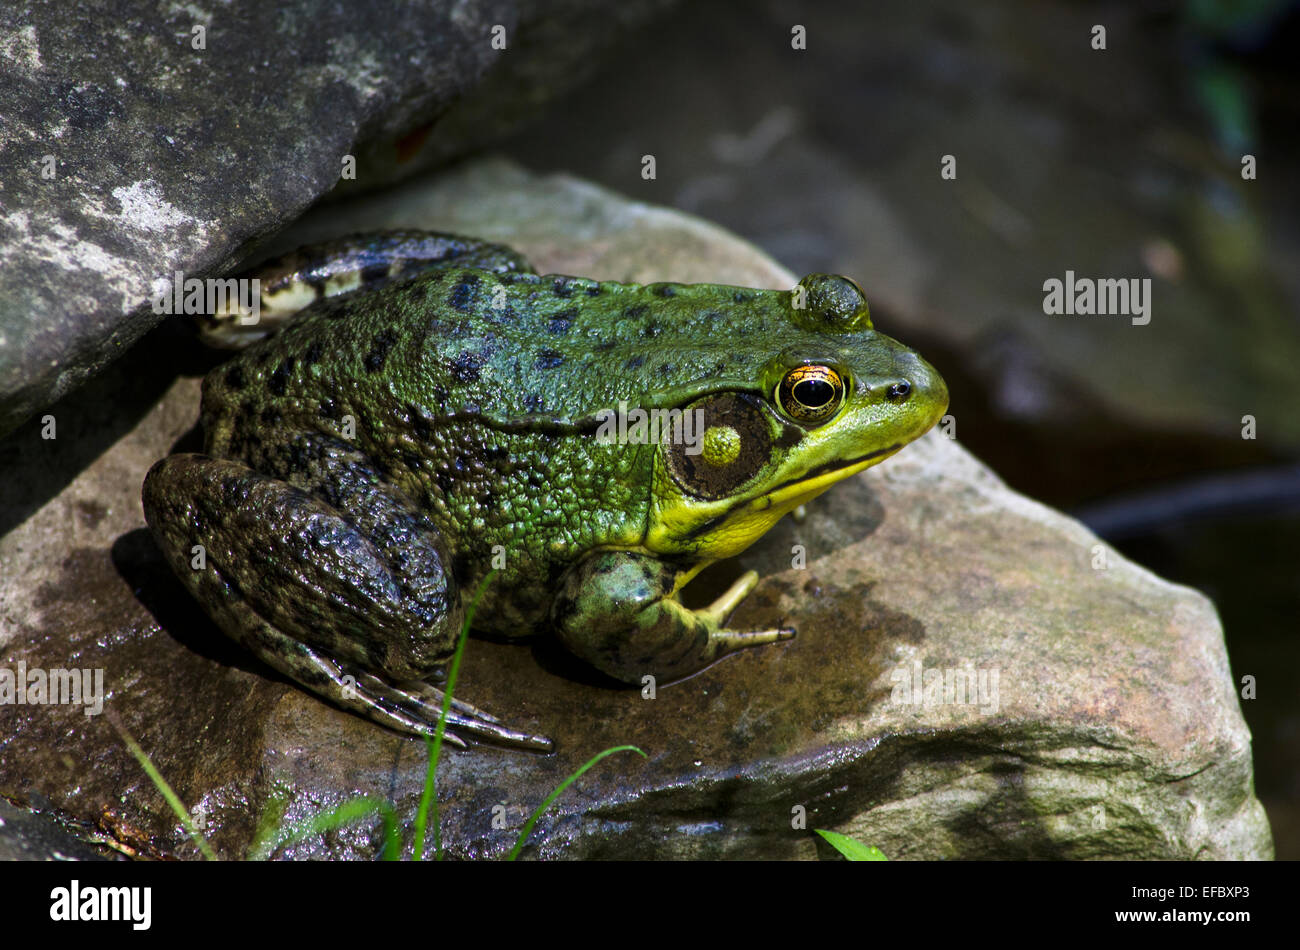 Green frog close up sitting on rock near pond. Stock Photo